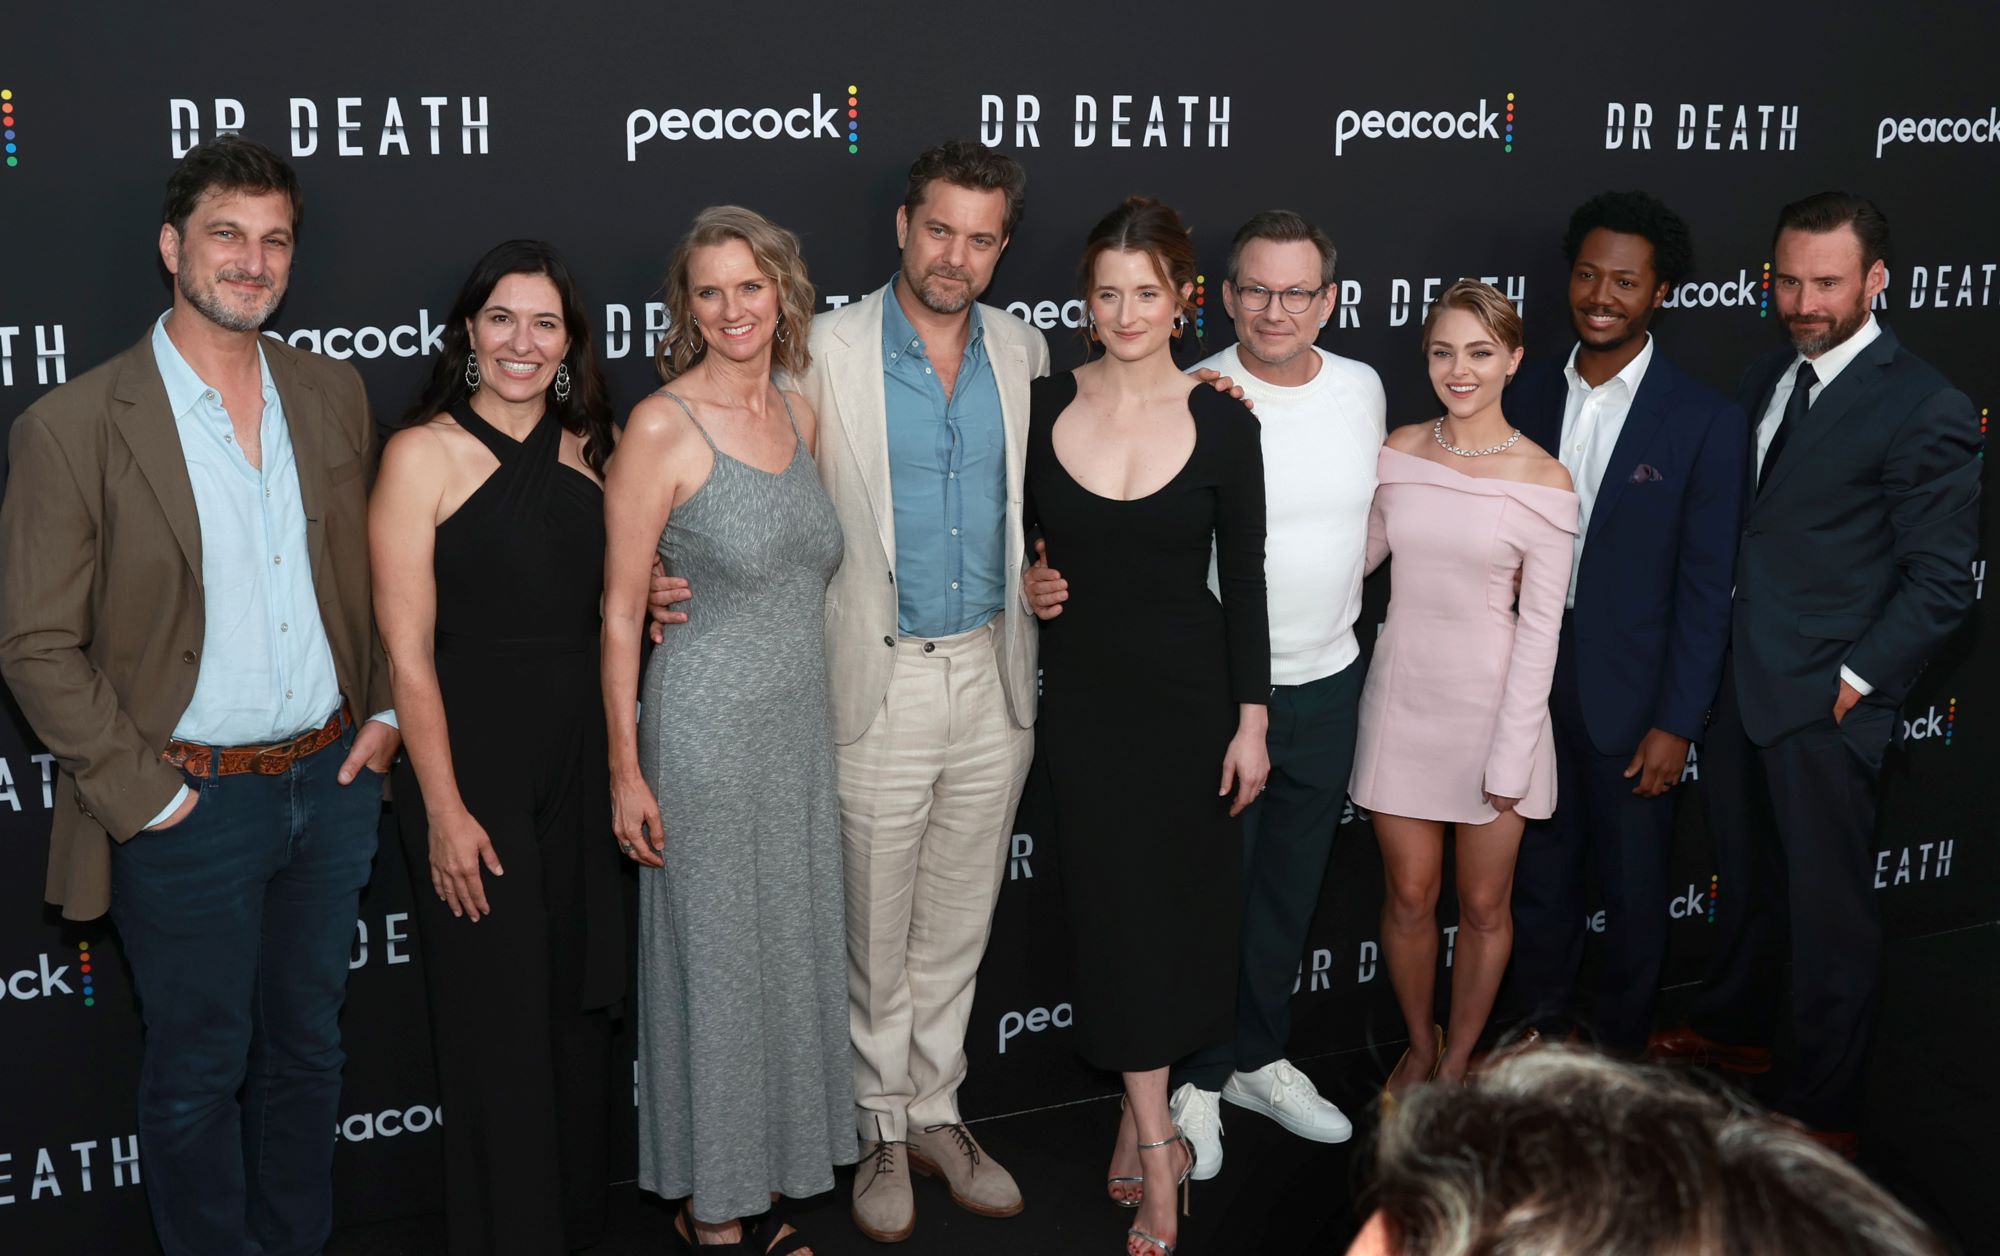 Nine cast members from 'Dr. Death' are dressed professionally standing in front of a black background with Dr. Death and Peacock written on it.